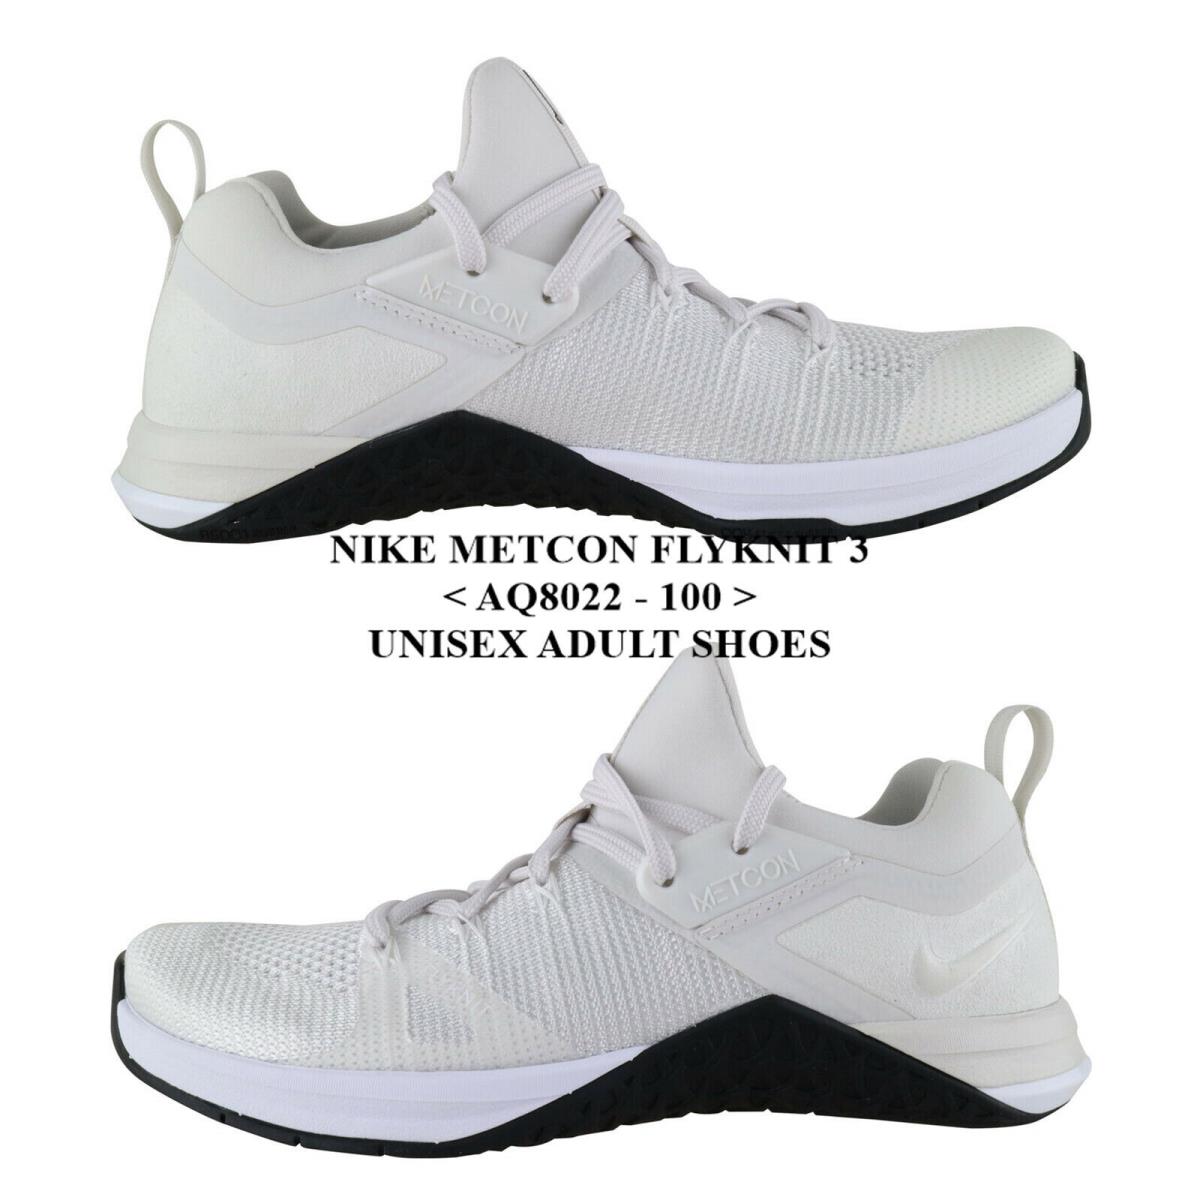 Nike Metcon Flyknit 3<AQ8022 - 100>.UNISEX Adults Athletic Shoes with Box - WHITE / PLATINUM TINT